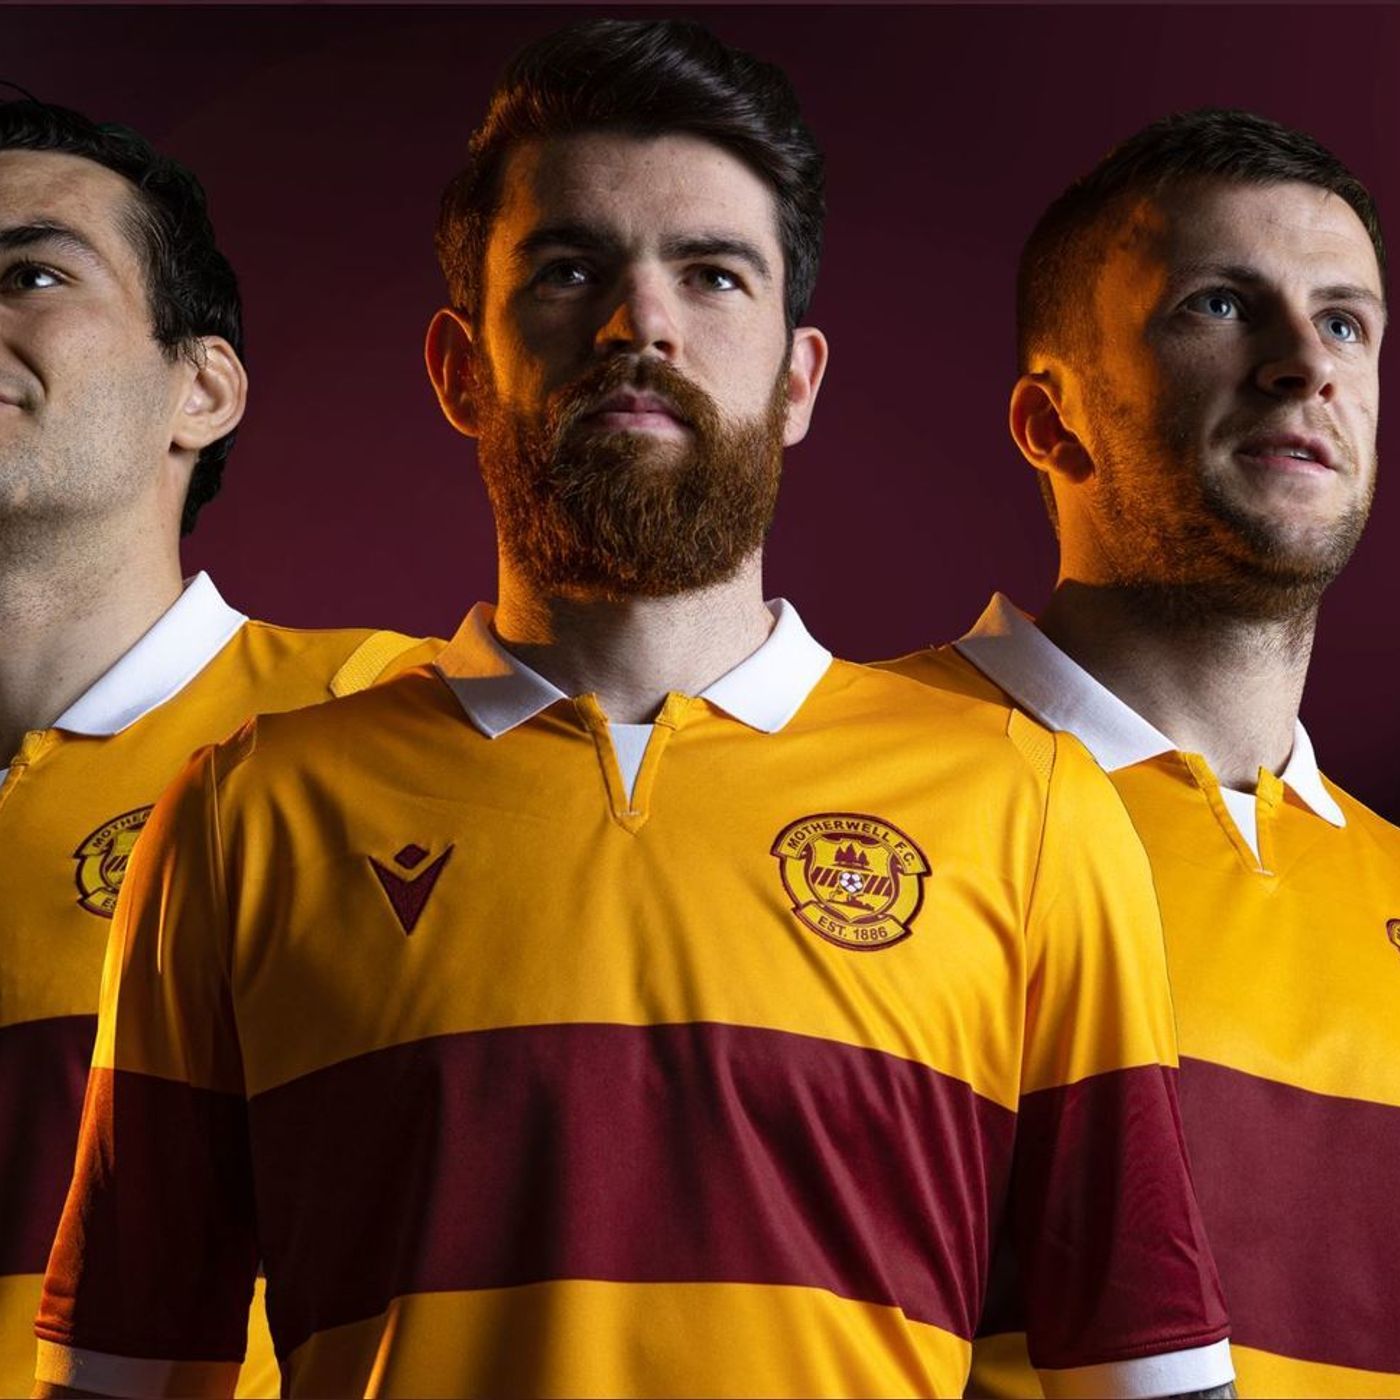 43: Content and Branding at Motherwell FC with Grant Russell